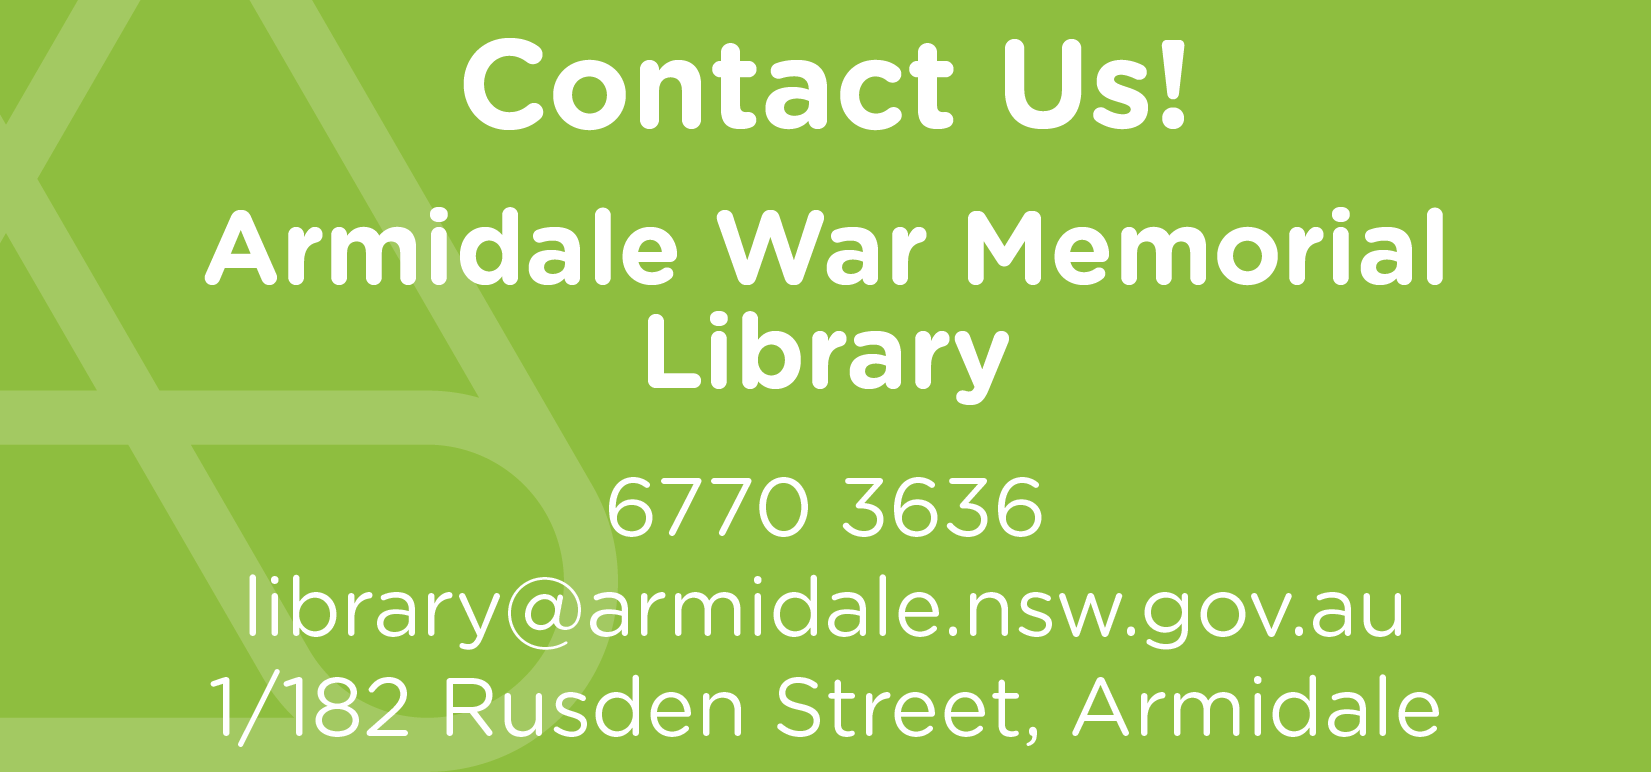 Library Contact Us Arm